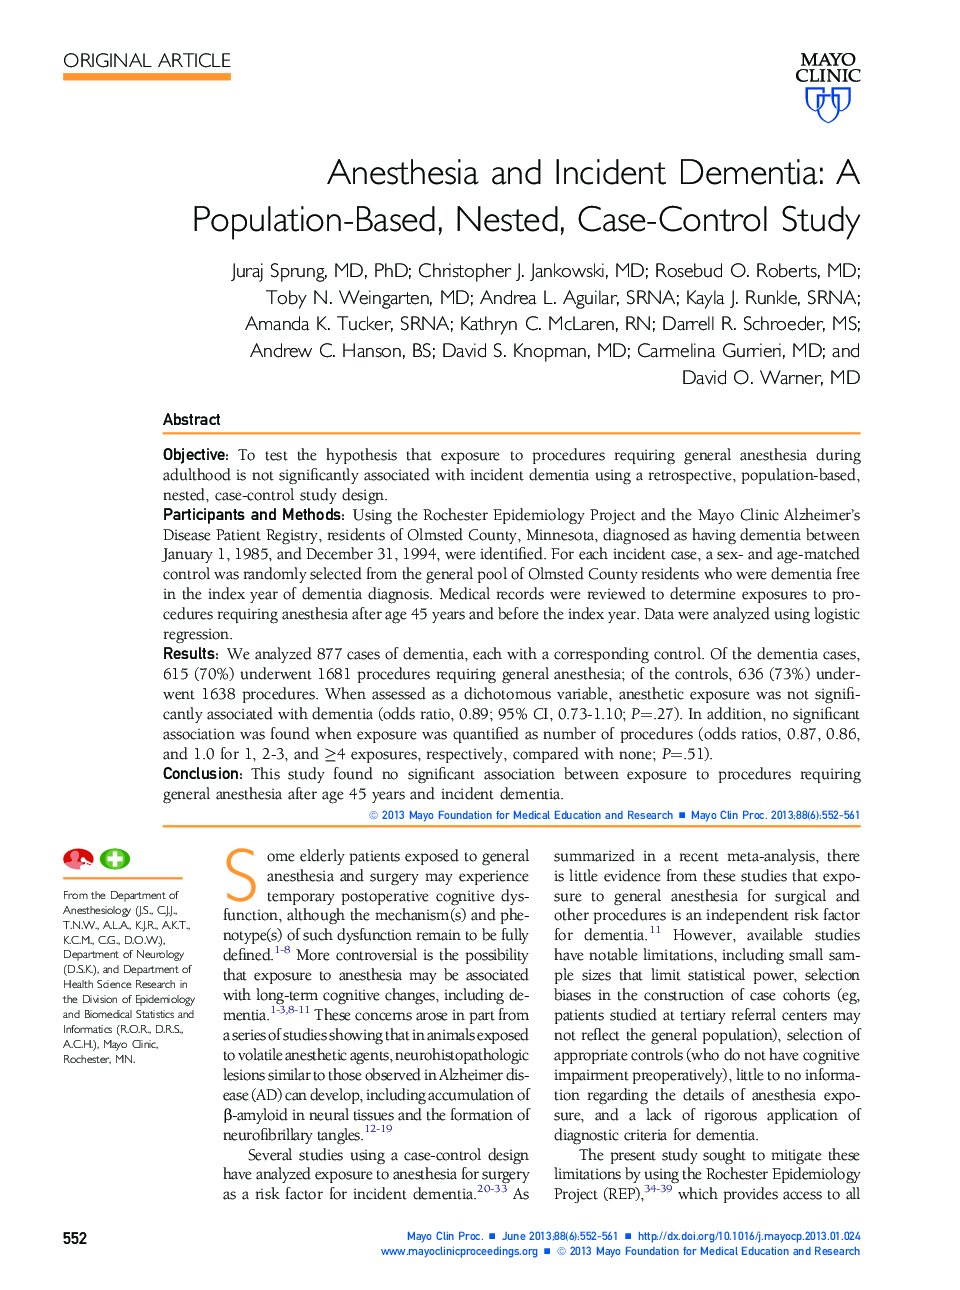 Anesthesia and Incident Dementia: A Population-Based, Nested, Case-Control Study